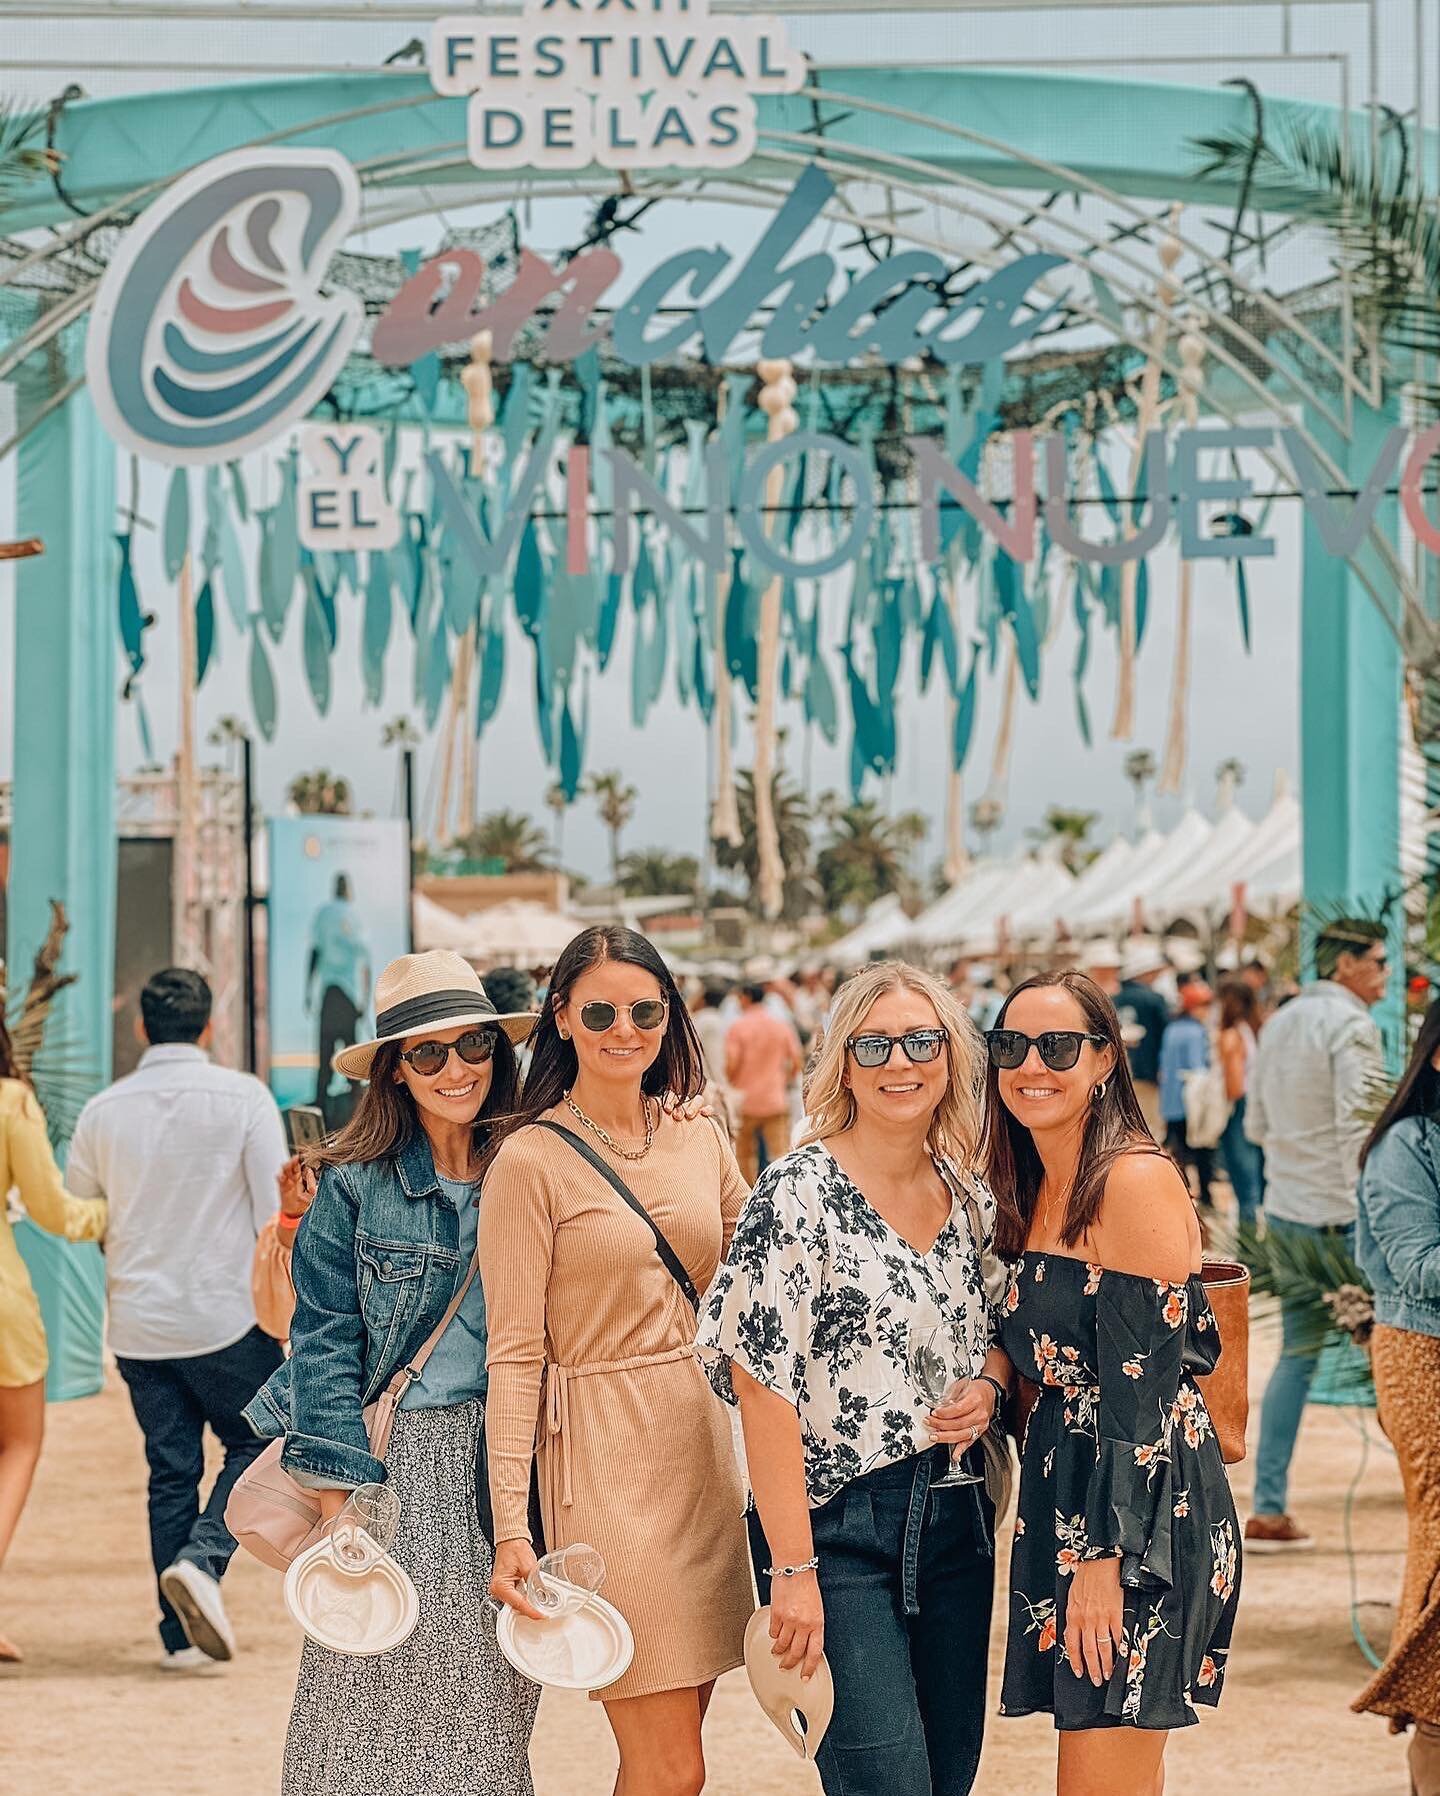 Last call to join us for the Shellfish and New Wine Festival all inclusive day experience this upcoming Sunday, April 23rd. 

*Only for shellfish and wine lovers*
🦞🦪🦀🐟🦐 🍷 

Itinerary: 

Meet your host and driver in Tijuana&rsquo;s Border and ge